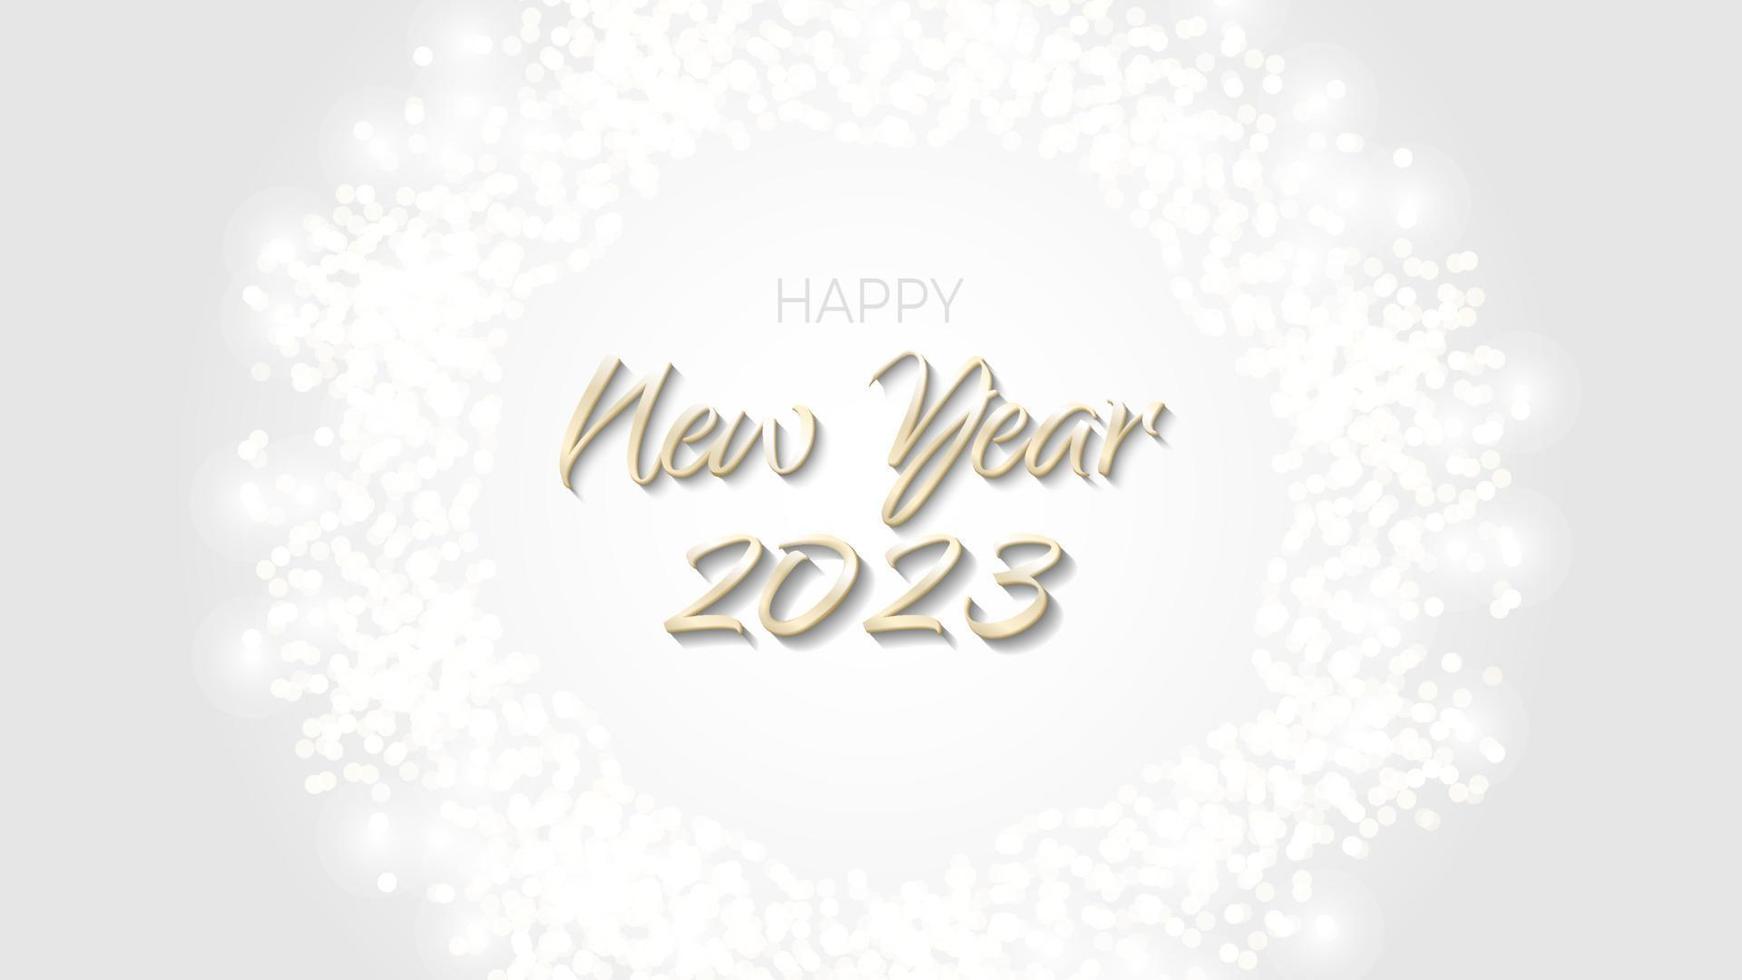 Happy New Year 2023 banner glittering golden circle. Gold sparkling ring with dust glitter graphic on white background. Beautiful numbers graphic design template. Luxurious gradient calendar vector